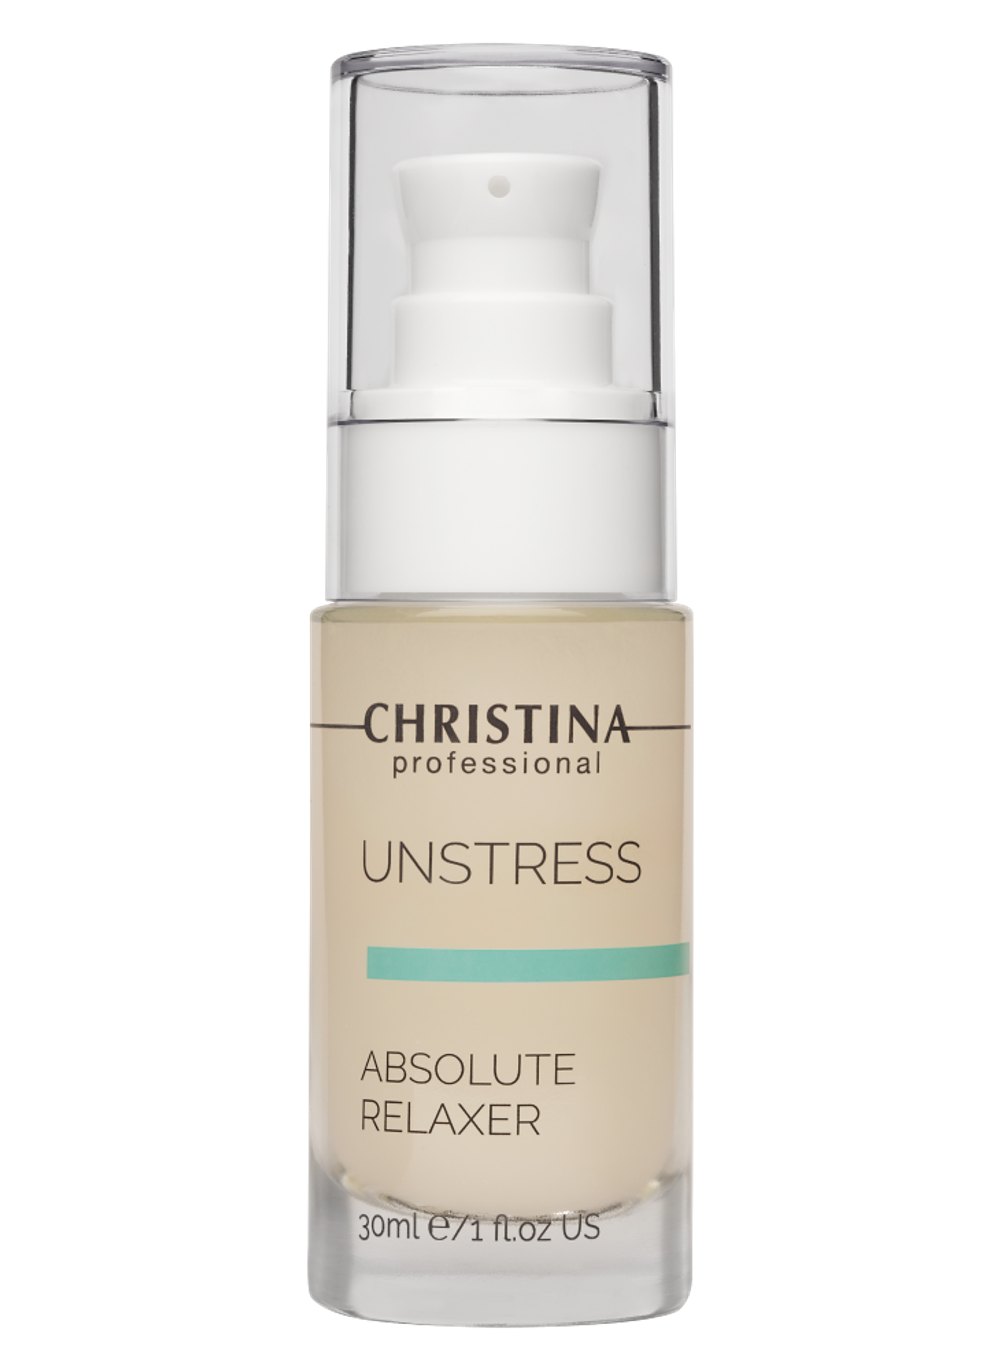 CHRISTINA Unstress Absolute Relaxer